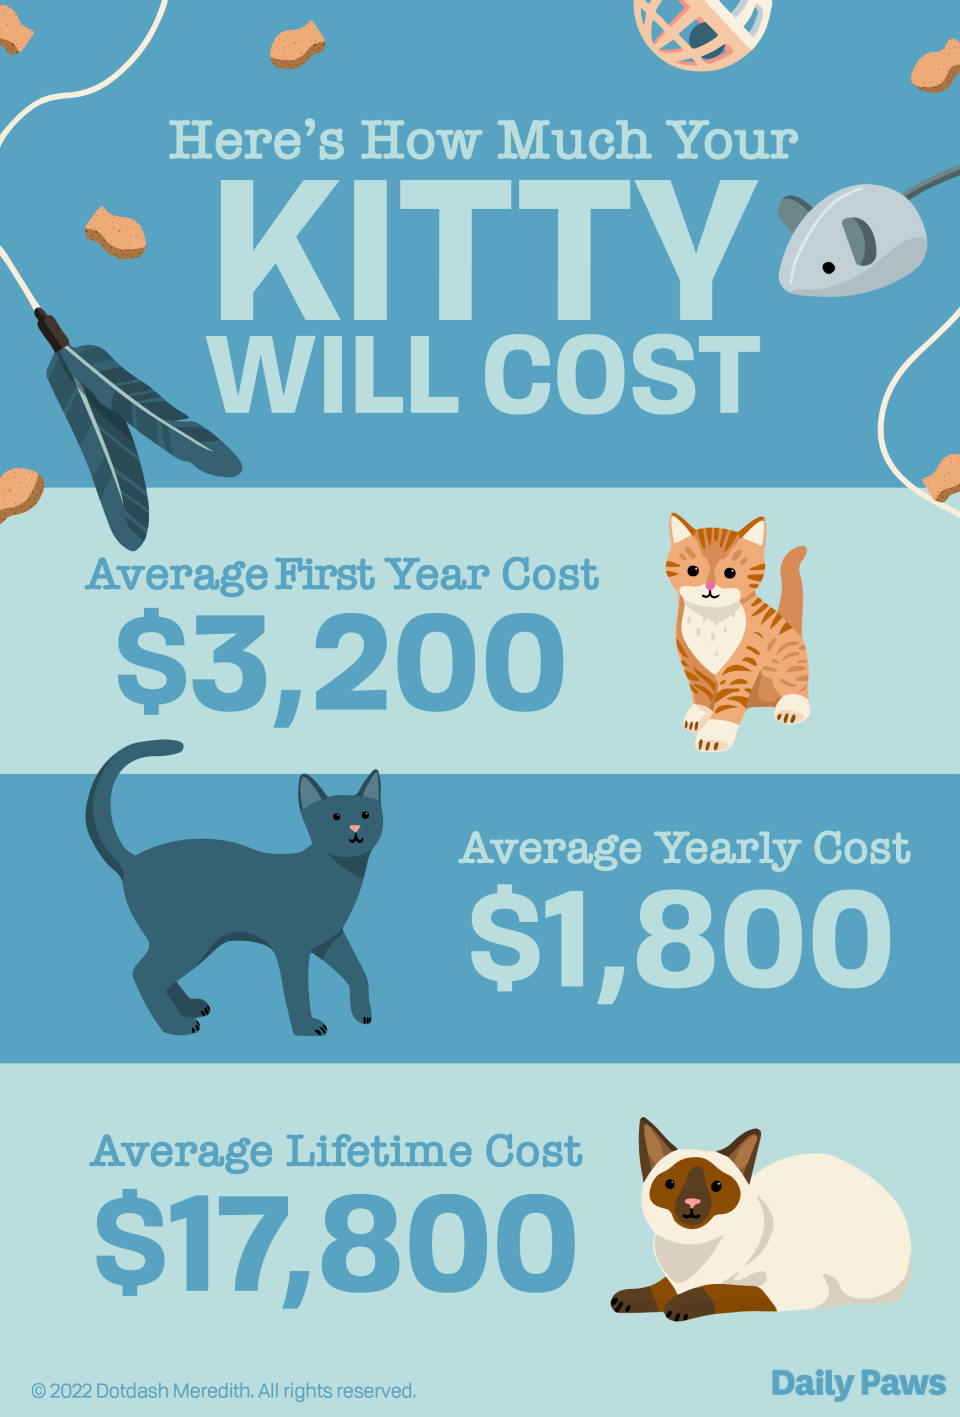 Infographic showing first year, annual, and lifetime average costs